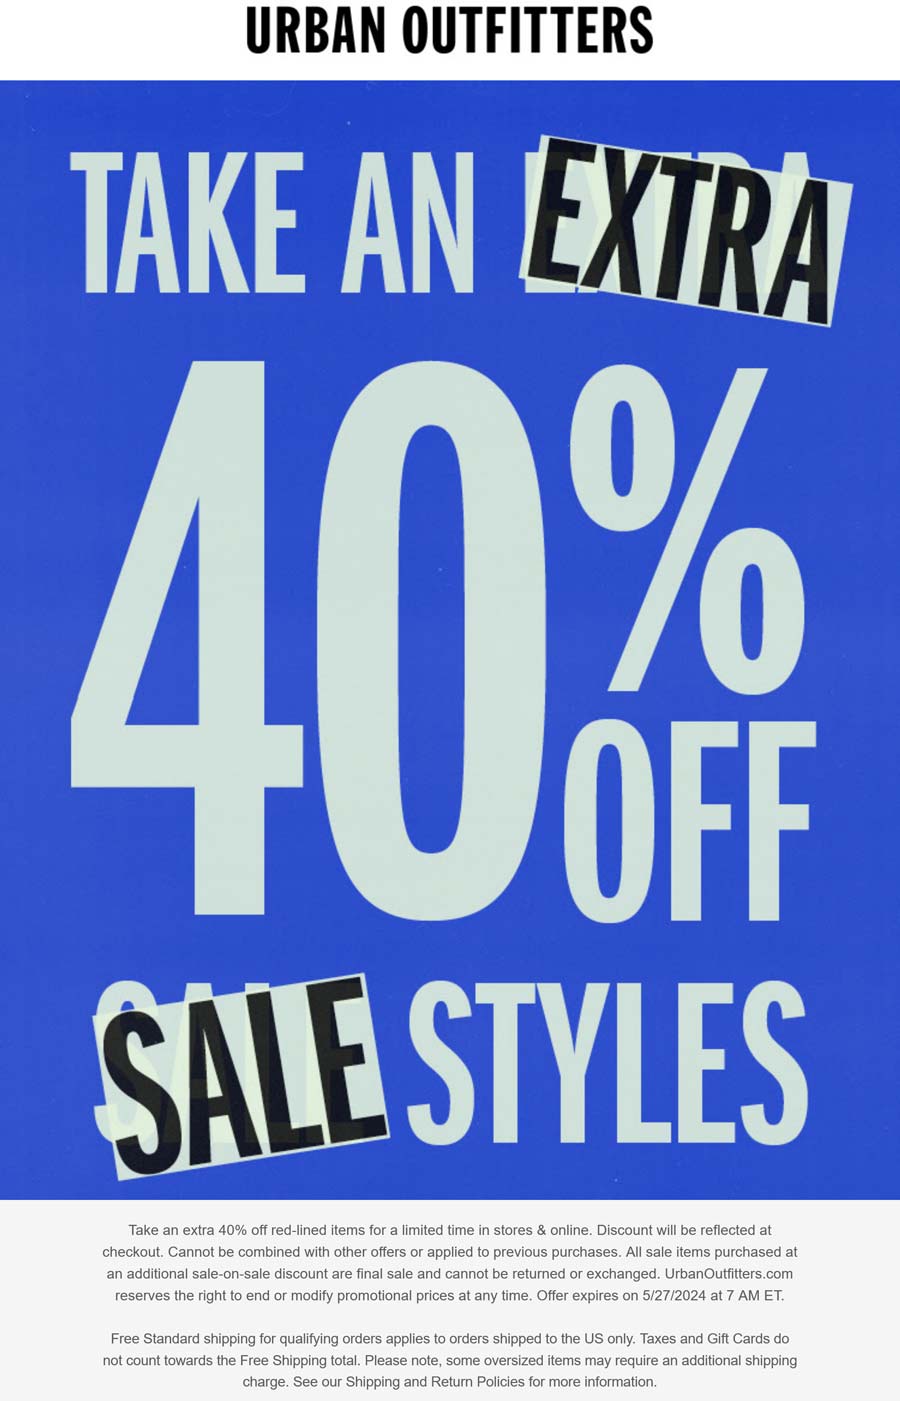 Urban Outfitters stores Coupon  Extra 40% off sale items today at Urban Outfitters, ditto online #urbanoutfitters 